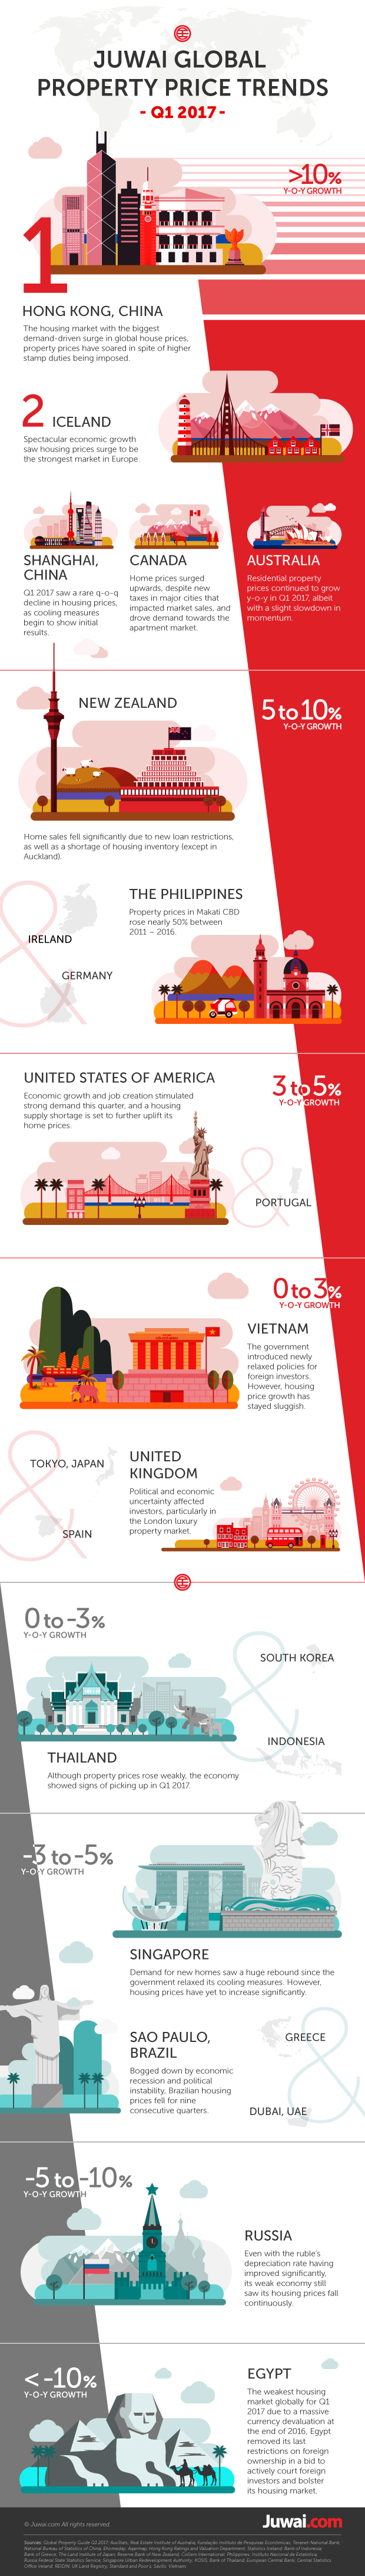 Juwai Global Property Price Trends Q1 2017 Infographic